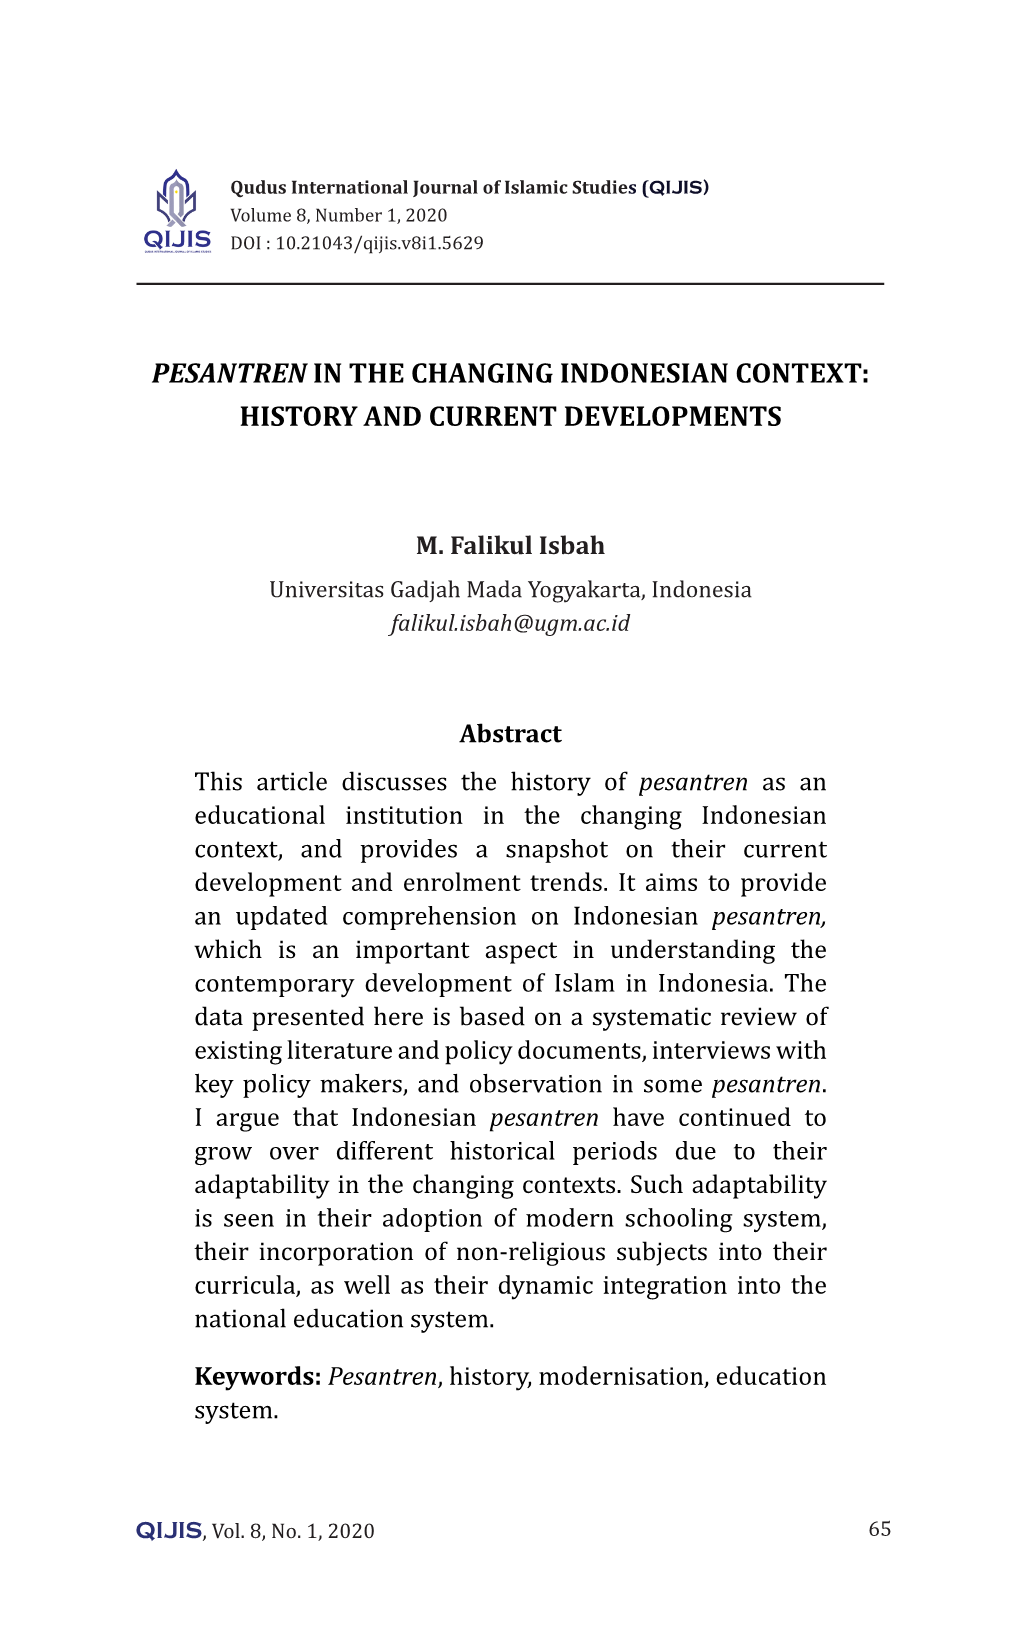 Pesantren in the Changing Indonesian Context: History and Current Developments